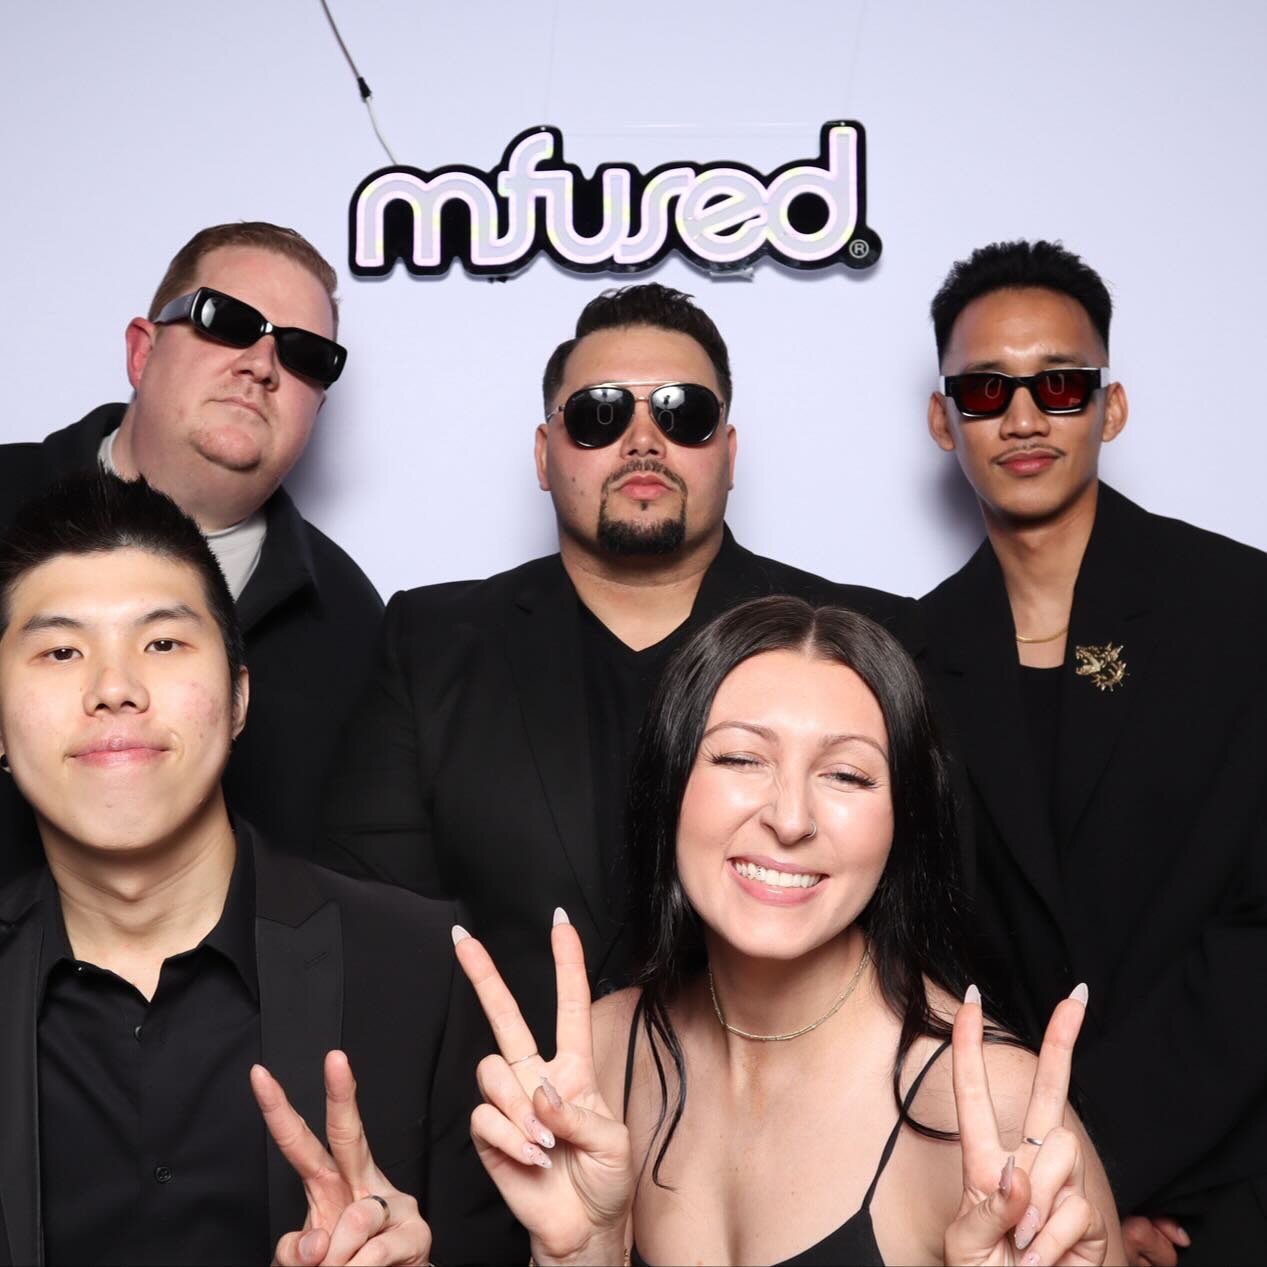 Thanks to @mfusedculture for having us at your booth at the Northwest Leaf Bowl this past weekend! We got a chance to witness an awards gala for the NW&rsquo;s best cannabis products. It was a vibe for sure! 💚